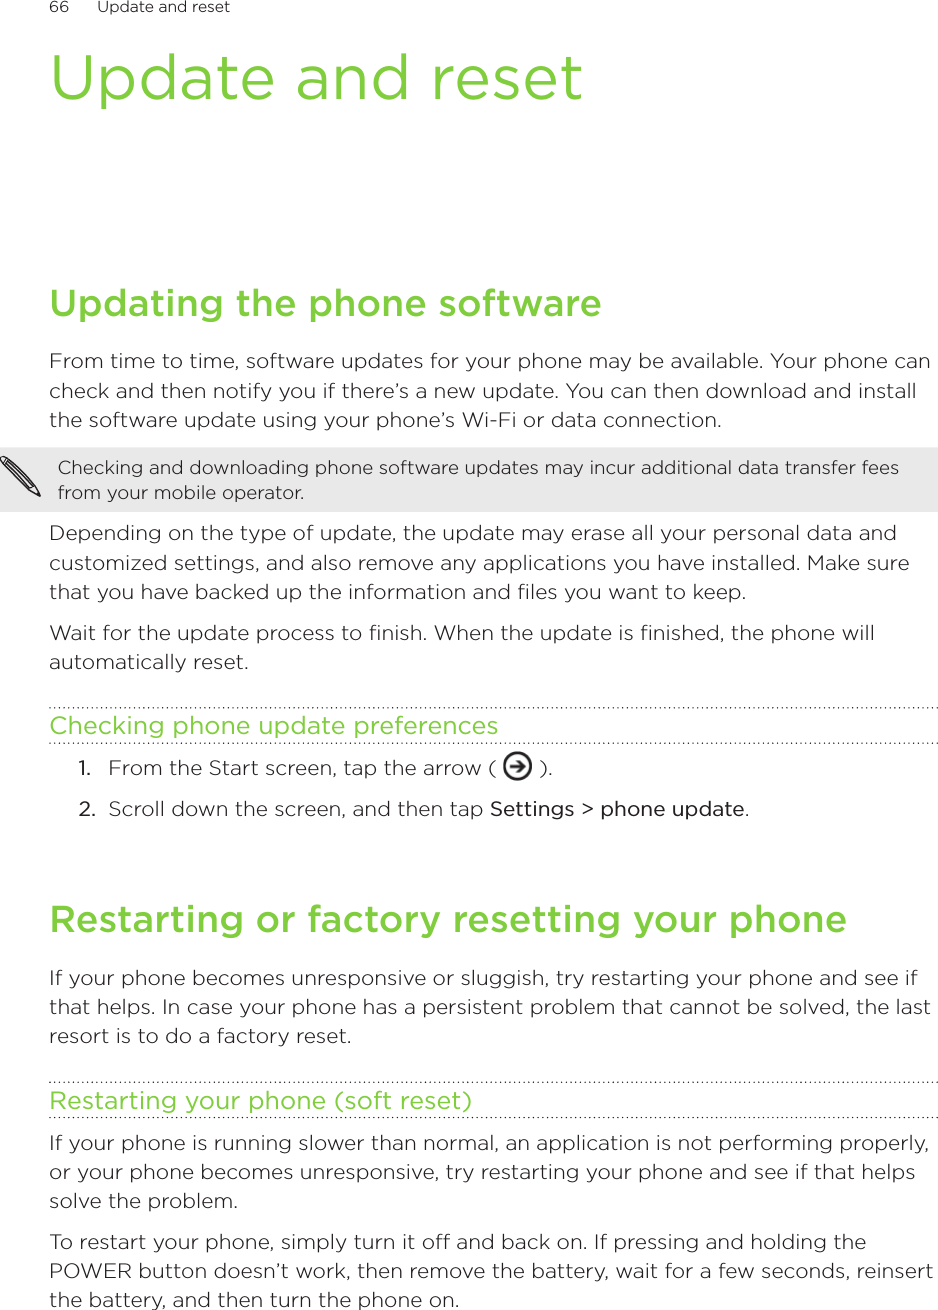 66      Update and reset      Update and resetUpdating the phone softwareFrom time to time, software updates for your phone may be available. Your phone can check and then notify you if there’s a new update. You can then download and install the software update using your phone’s Wi-Fi or data connection.Checking and downloading phone software updates may incur additional data transfer fees from your mobile operator.Depending on the type of update, the update may erase all your personal data and customized settings, and also remove any applications you have installed. Make sure that you have backed up the information and files you want to keep.Wait for the update process to finish. When the update is finished, the phone will automatically reset. Checking phone update preferencesFrom the Start screen, tap the arrow (   ).Scroll down the screen, and then tap Settings &gt; phone update.Restarting or factory resetting your phoneIf your phone becomes unresponsive or sluggish, try restarting your phone and see if that helps. In case your phone has a persistent problem that cannot be solved, the last resort is to do a factory reset.Restarting your phone (soft reset)If your phone is running slower than normal, an application is not performing properly, or your phone becomes unresponsive, try restarting your phone and see if that helps solve the problem.To restart your phone, simply turn it off and back on. If pressing and holding the POWER button doesn’t work, then remove the battery, wait for a few seconds, reinsert the battery, and then turn the phone on.1.2.